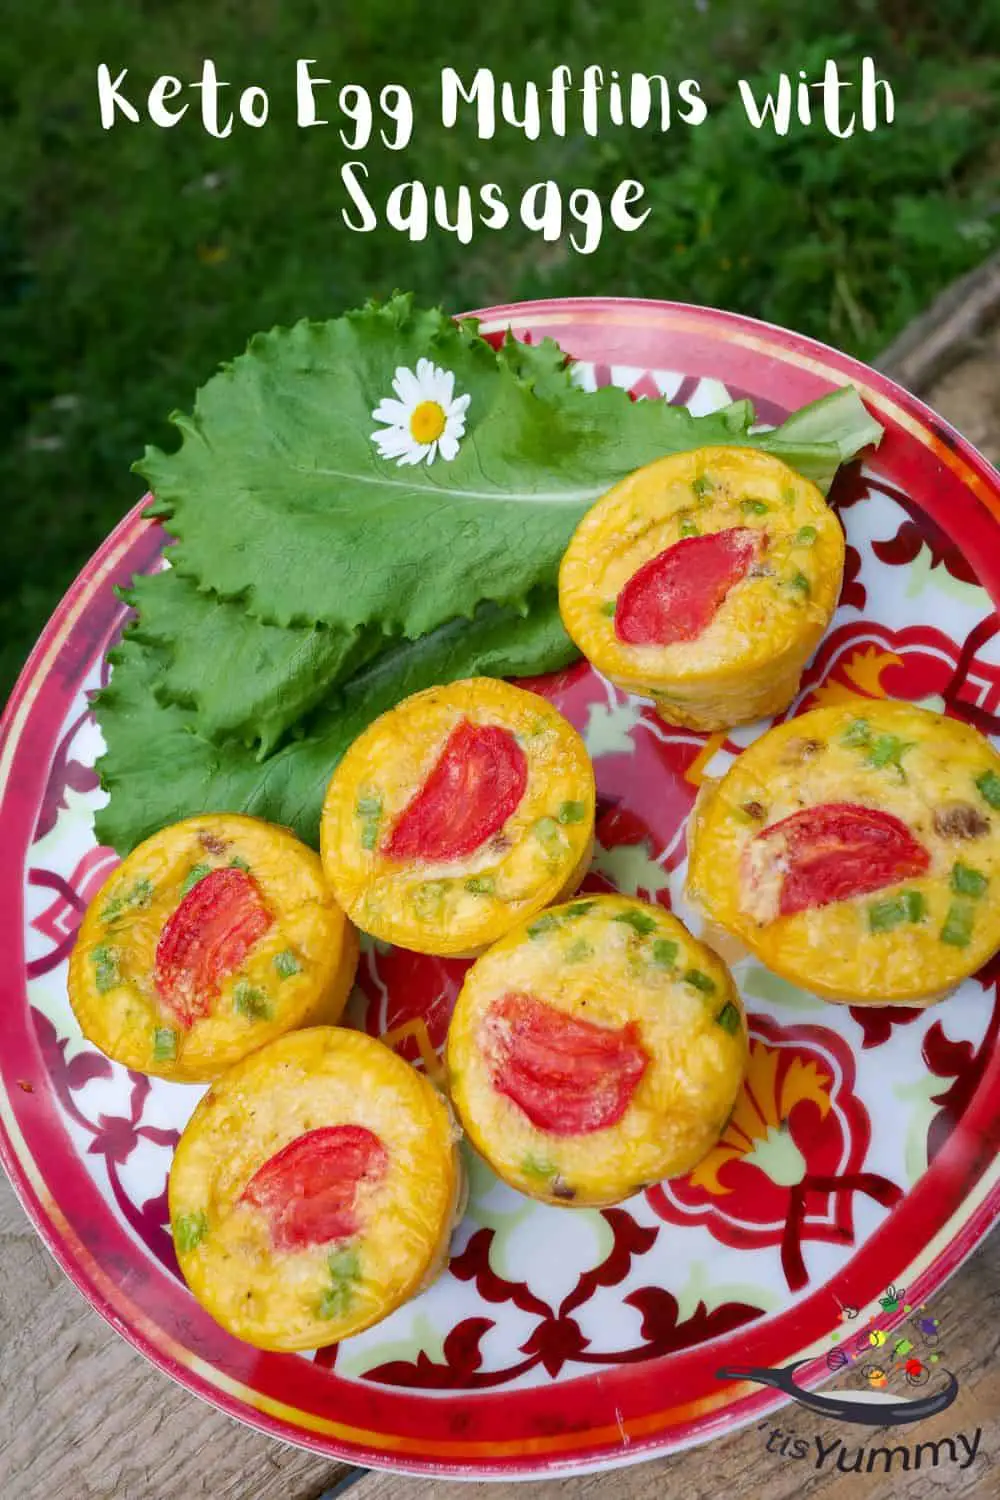 keto egg muffins with sausage on a plate with green lettuce leaf